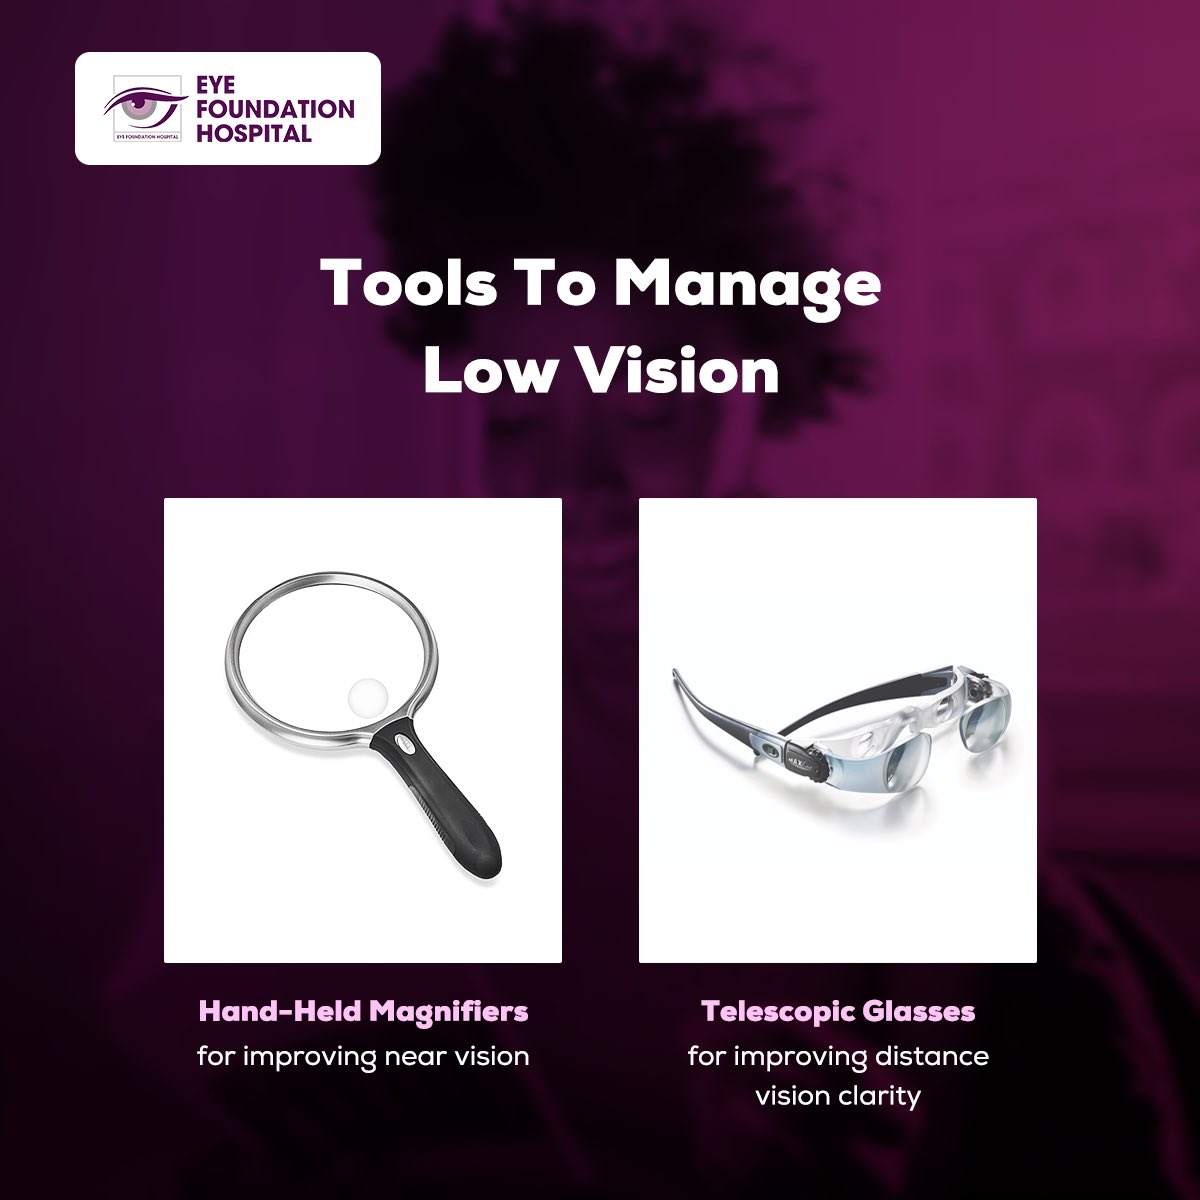 Empower your vision with the right tools; from handheld magnifiers to innovative technologies, we've got the right tools to enhance your visual experience.

Send a DM or drop a comment if you have questions, we are here to give you expert guidance.

#lowvision #eyecare #eyetools